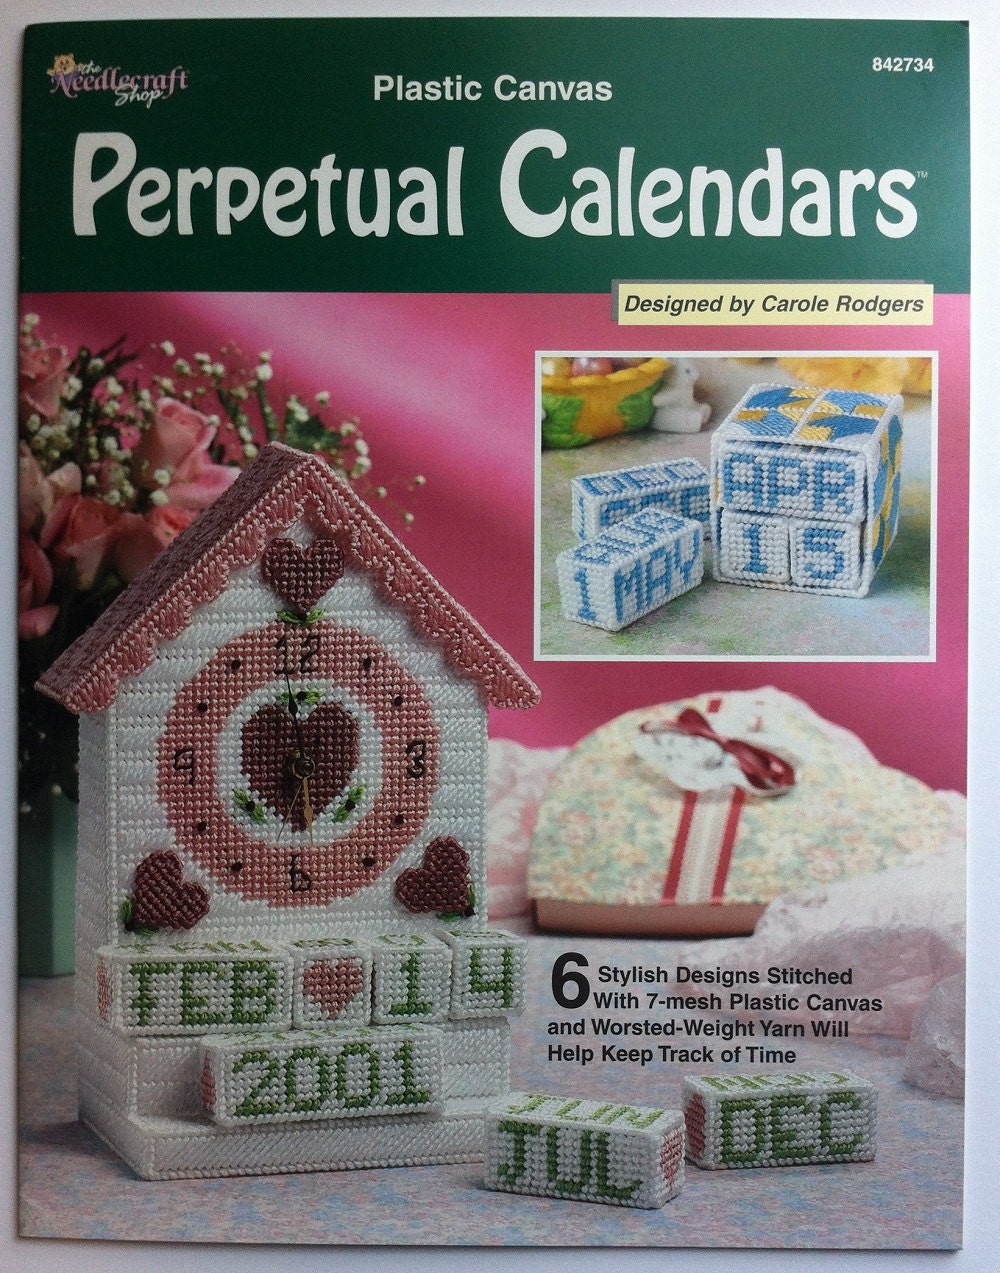 Perpetual Calendars Plastic Canvas Pattern Book The by CHpatterns